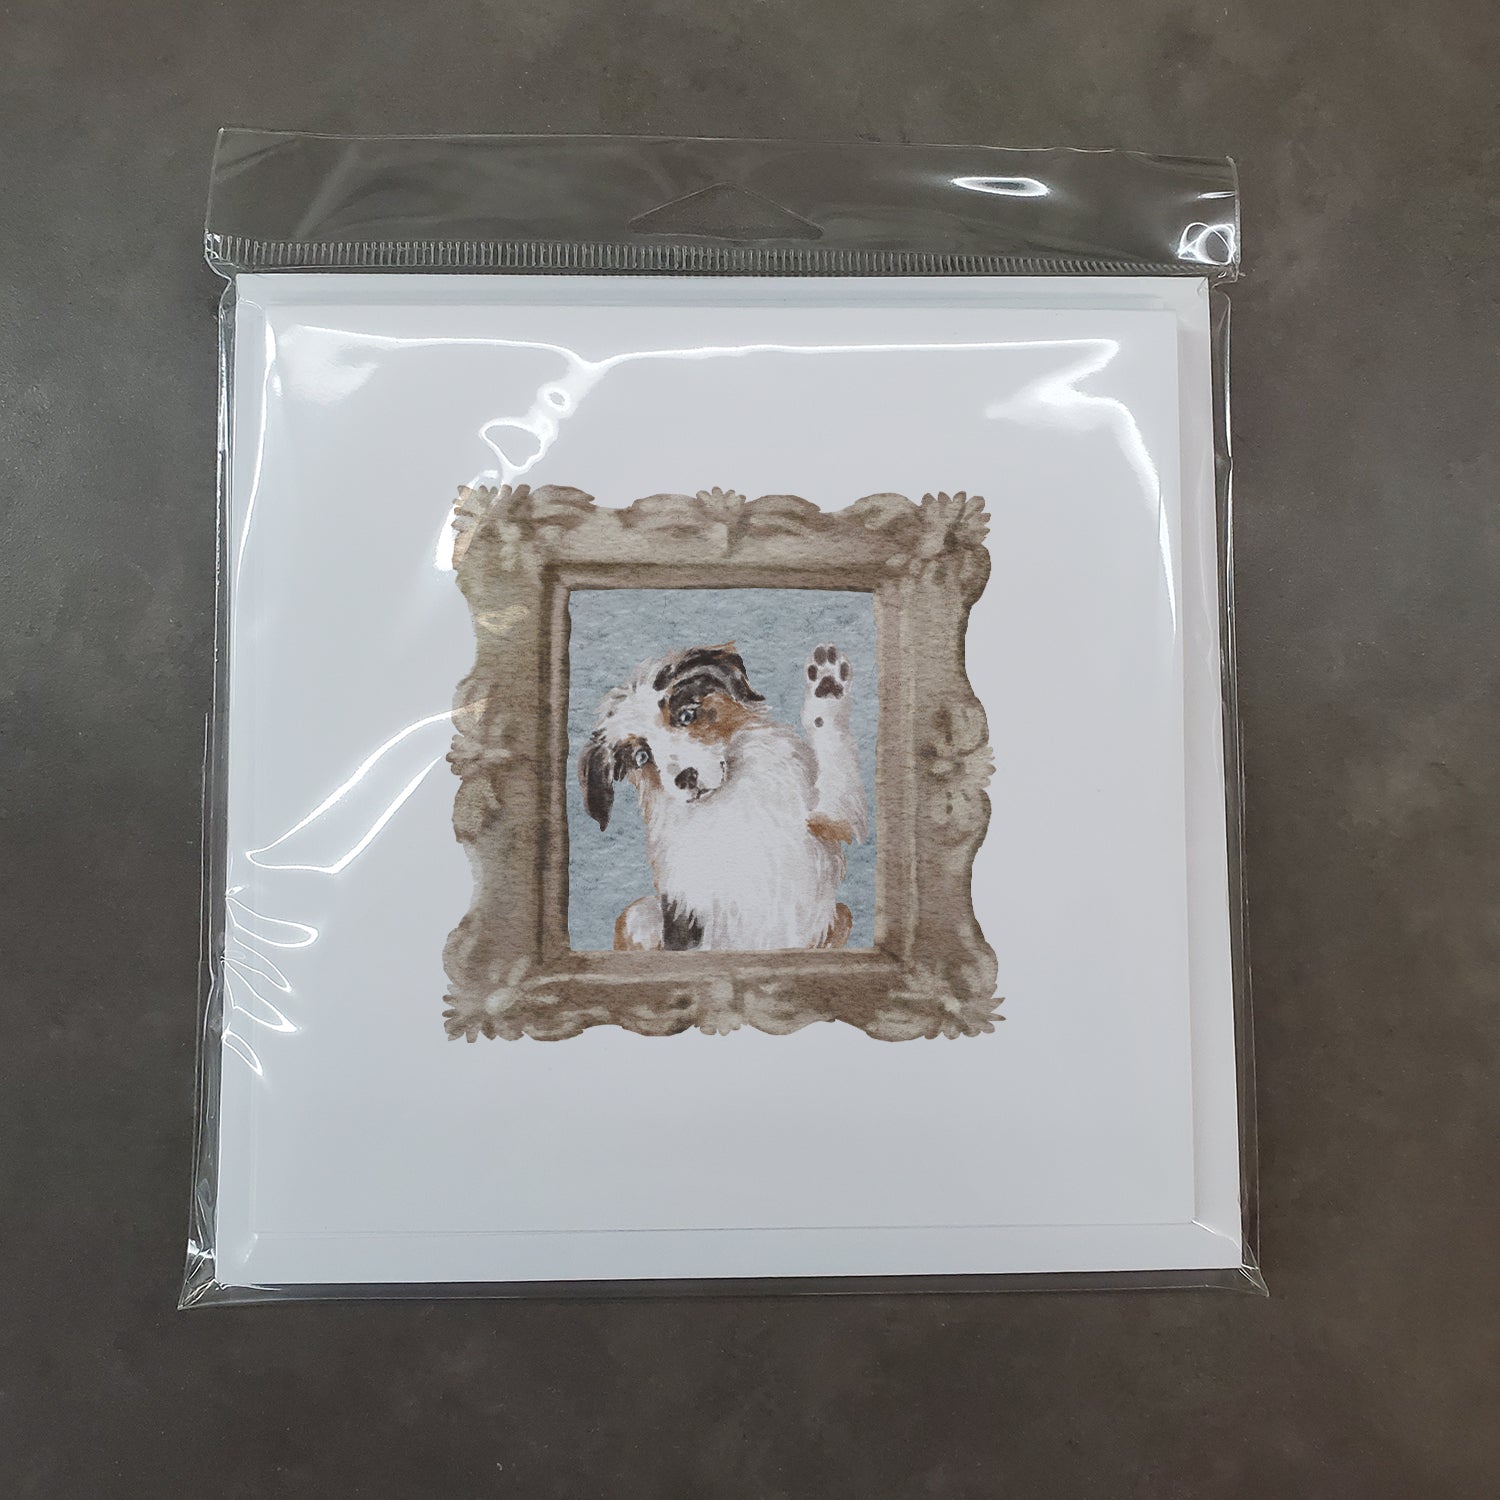 Australian Shepherd Merle Hello Square Greeting Cards and Envelopes Pack of 8 - the-store.com